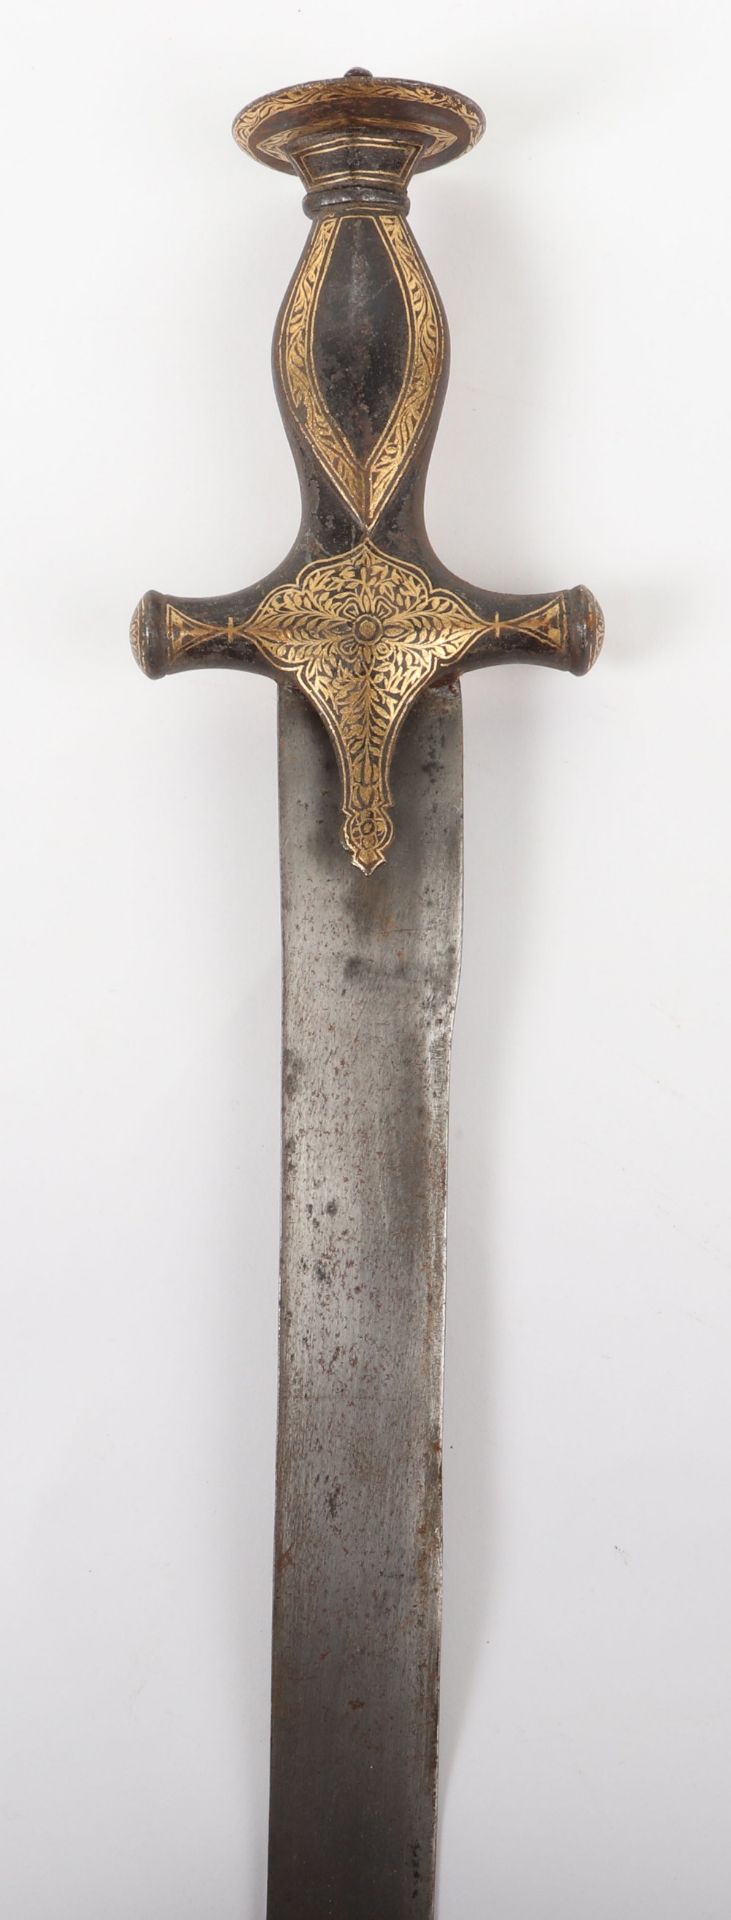 Decorative Indian Sword Tulwar Perhaps for a Youth